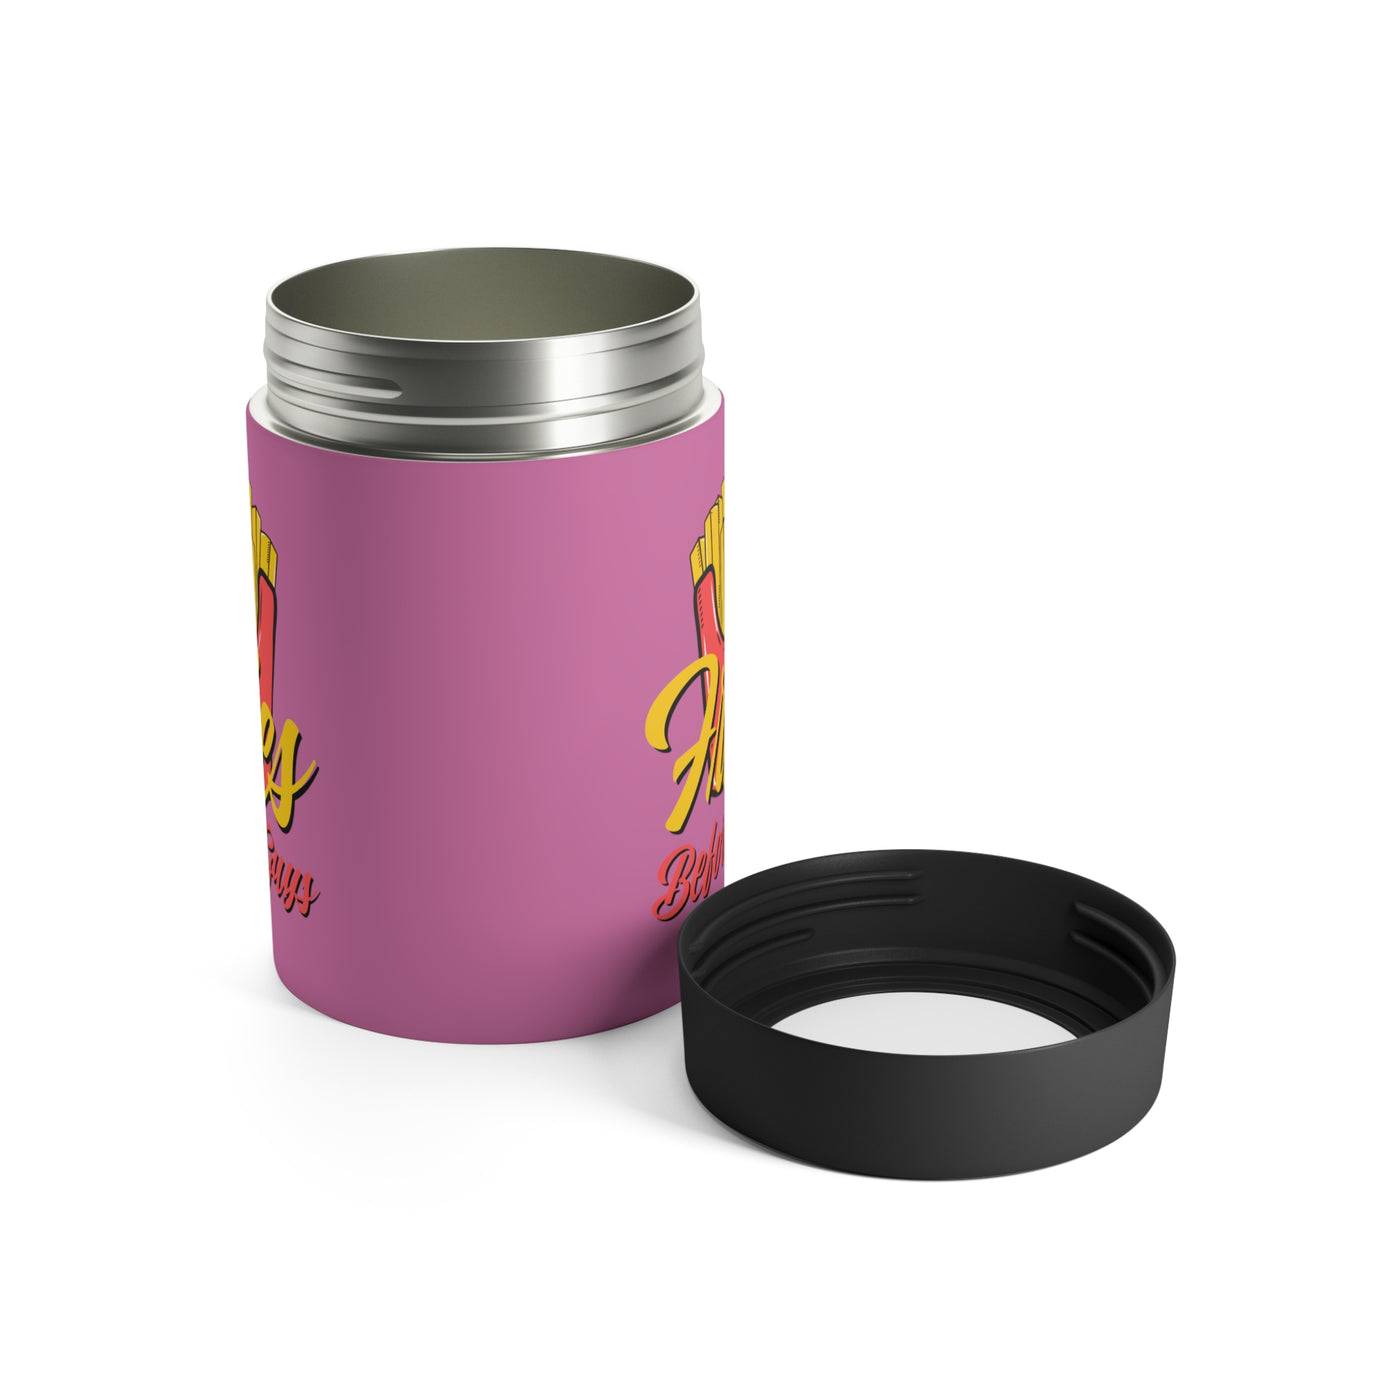 Fries Before Guys Stainless Steel Can Holder